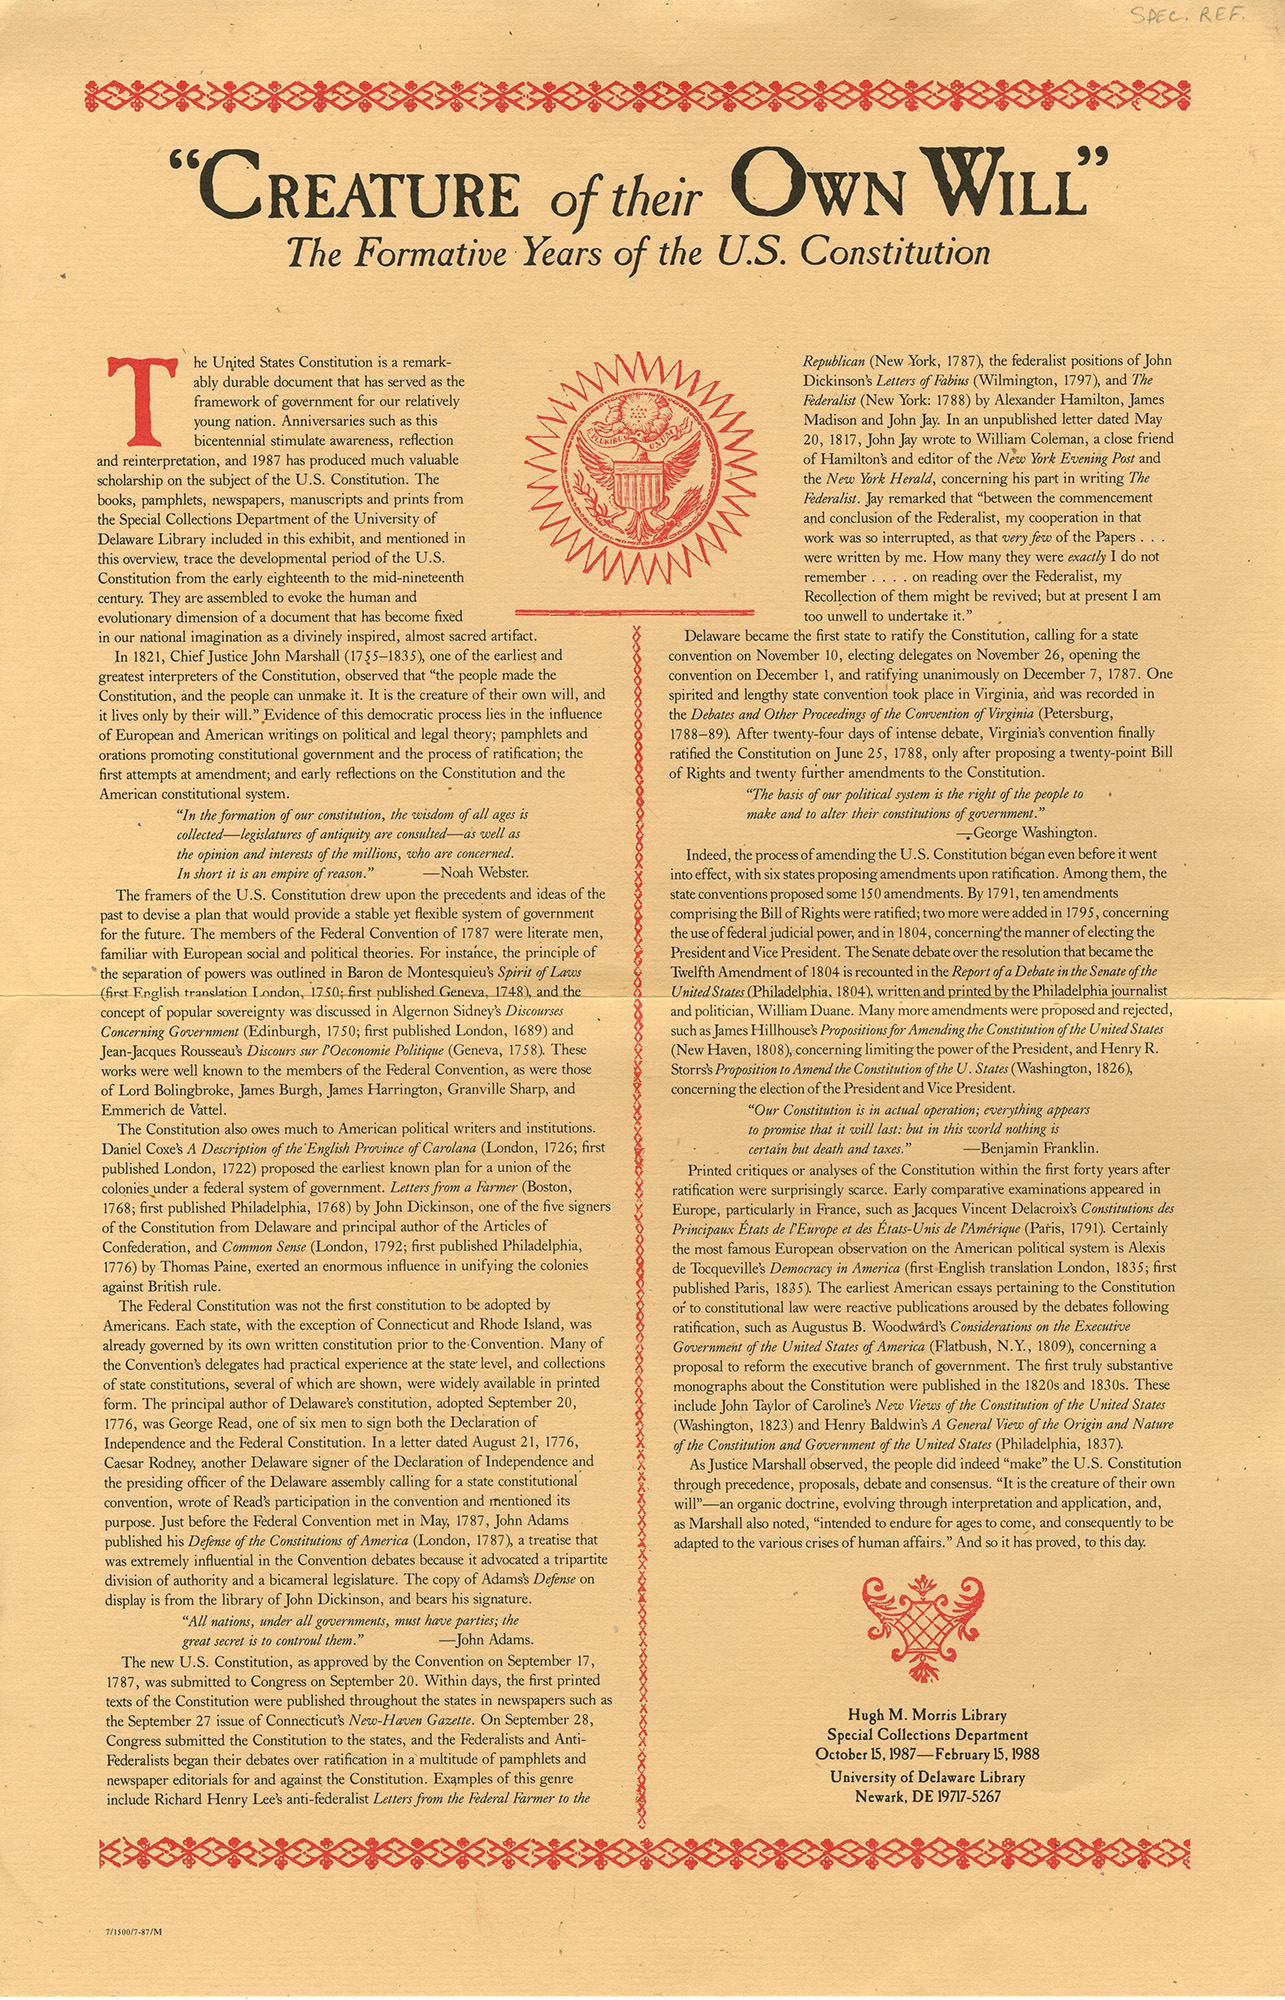 Poster for “Creature of Their Own Will: The Formative Years of the U.S. Constitution” exhibition, 1987